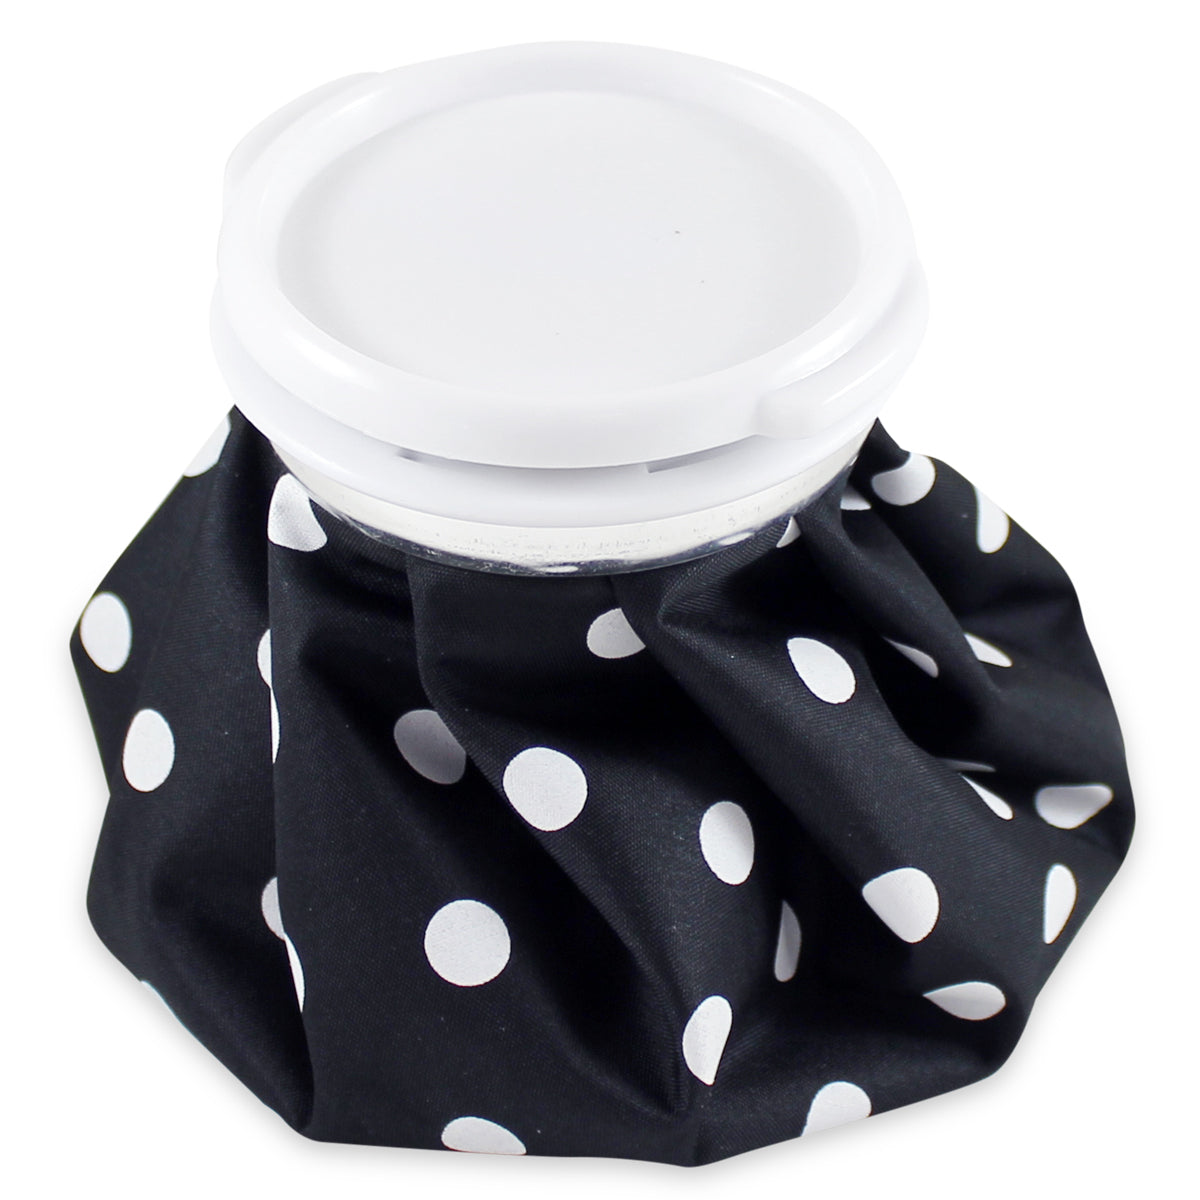 Primary image of Ice Bag - Black + White Dots